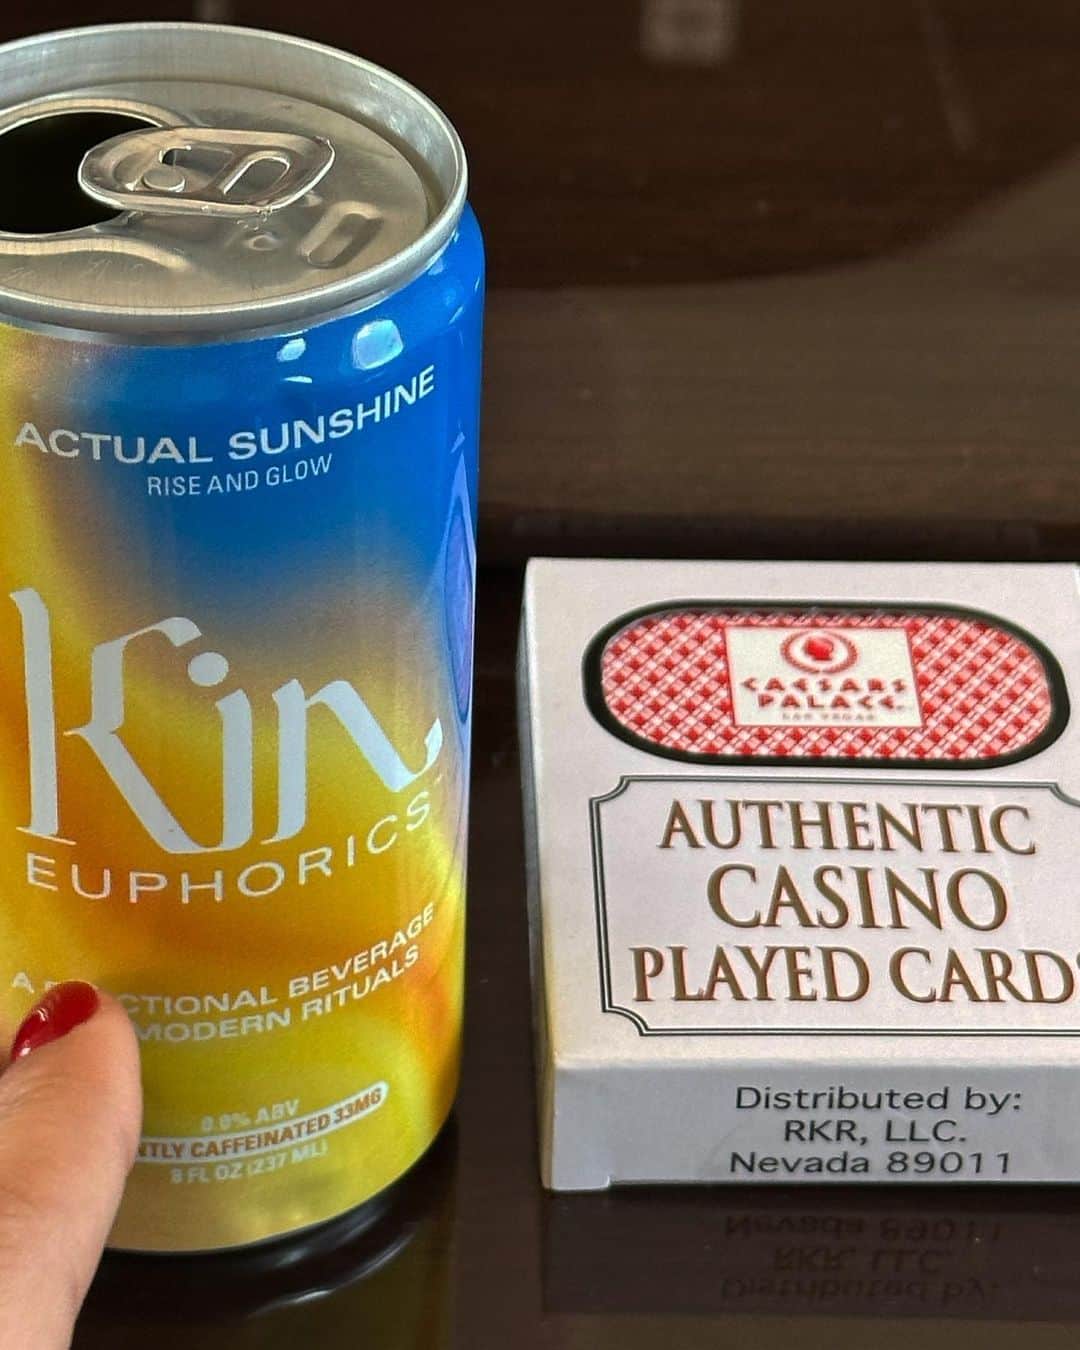 ベラ・ハディッドのインスタグラム：「On the way to celebrate our new @kineuphorics partnership with Caesars Palace, introducing our functional beverages to this iconic Vegas hotel!  We are so excited to announce that Kin will be available and stocked throughout the minibars/in-rooms and across all 6 towers, pools, bars, restaurants, and lounges including the world-famous Omnia nightclub!!!! I am so excited!! Thank you @caesarspalace and @taogrouphospitality !  There was something, among many other things of course , that @jenofkin and I always agreed on. We never wanted to ostracize anyone from access to brain care and an opportunity to discover Wellness in a new way. We wanted to make sure that we were available to not only the health and wellness communities worldwide, but genuinely passionate about different communities ability to access & utilize the benefits of @kineuphorics in any field or place that they were in. We want music listeners, DJs, dancers, clubbers, ravers, musicians, eaters, drinkers, sober ragers to use kin as part of their lifestyle. Whether it’s to drink spritz to rage all night (with alcohol or not) actual sunshine for your hangover, light wave to come down, or Bloom for a little something extra 🌸 we have a drink for you….The same way we want the business, tech, entrepreneurs to try us. The same way we want health,wellness, artists, naturalists, athletes, mothers , fathers, students , teachers, doctors, to try us.. We really want the world of Vegas to try us and let us know how you feel! We want Kin to be used at all times of the day, with or without alcohol, whenever/whatever you need to stay healthy, uplifted, energetic and able to party on.   Vegas is the place we new we had to be. People that know how to have fun, that also deserve to feel good while doing it ! Thank you @caesarspalace & @taogrouphospitality for an amazing stay, great staff and great food!」